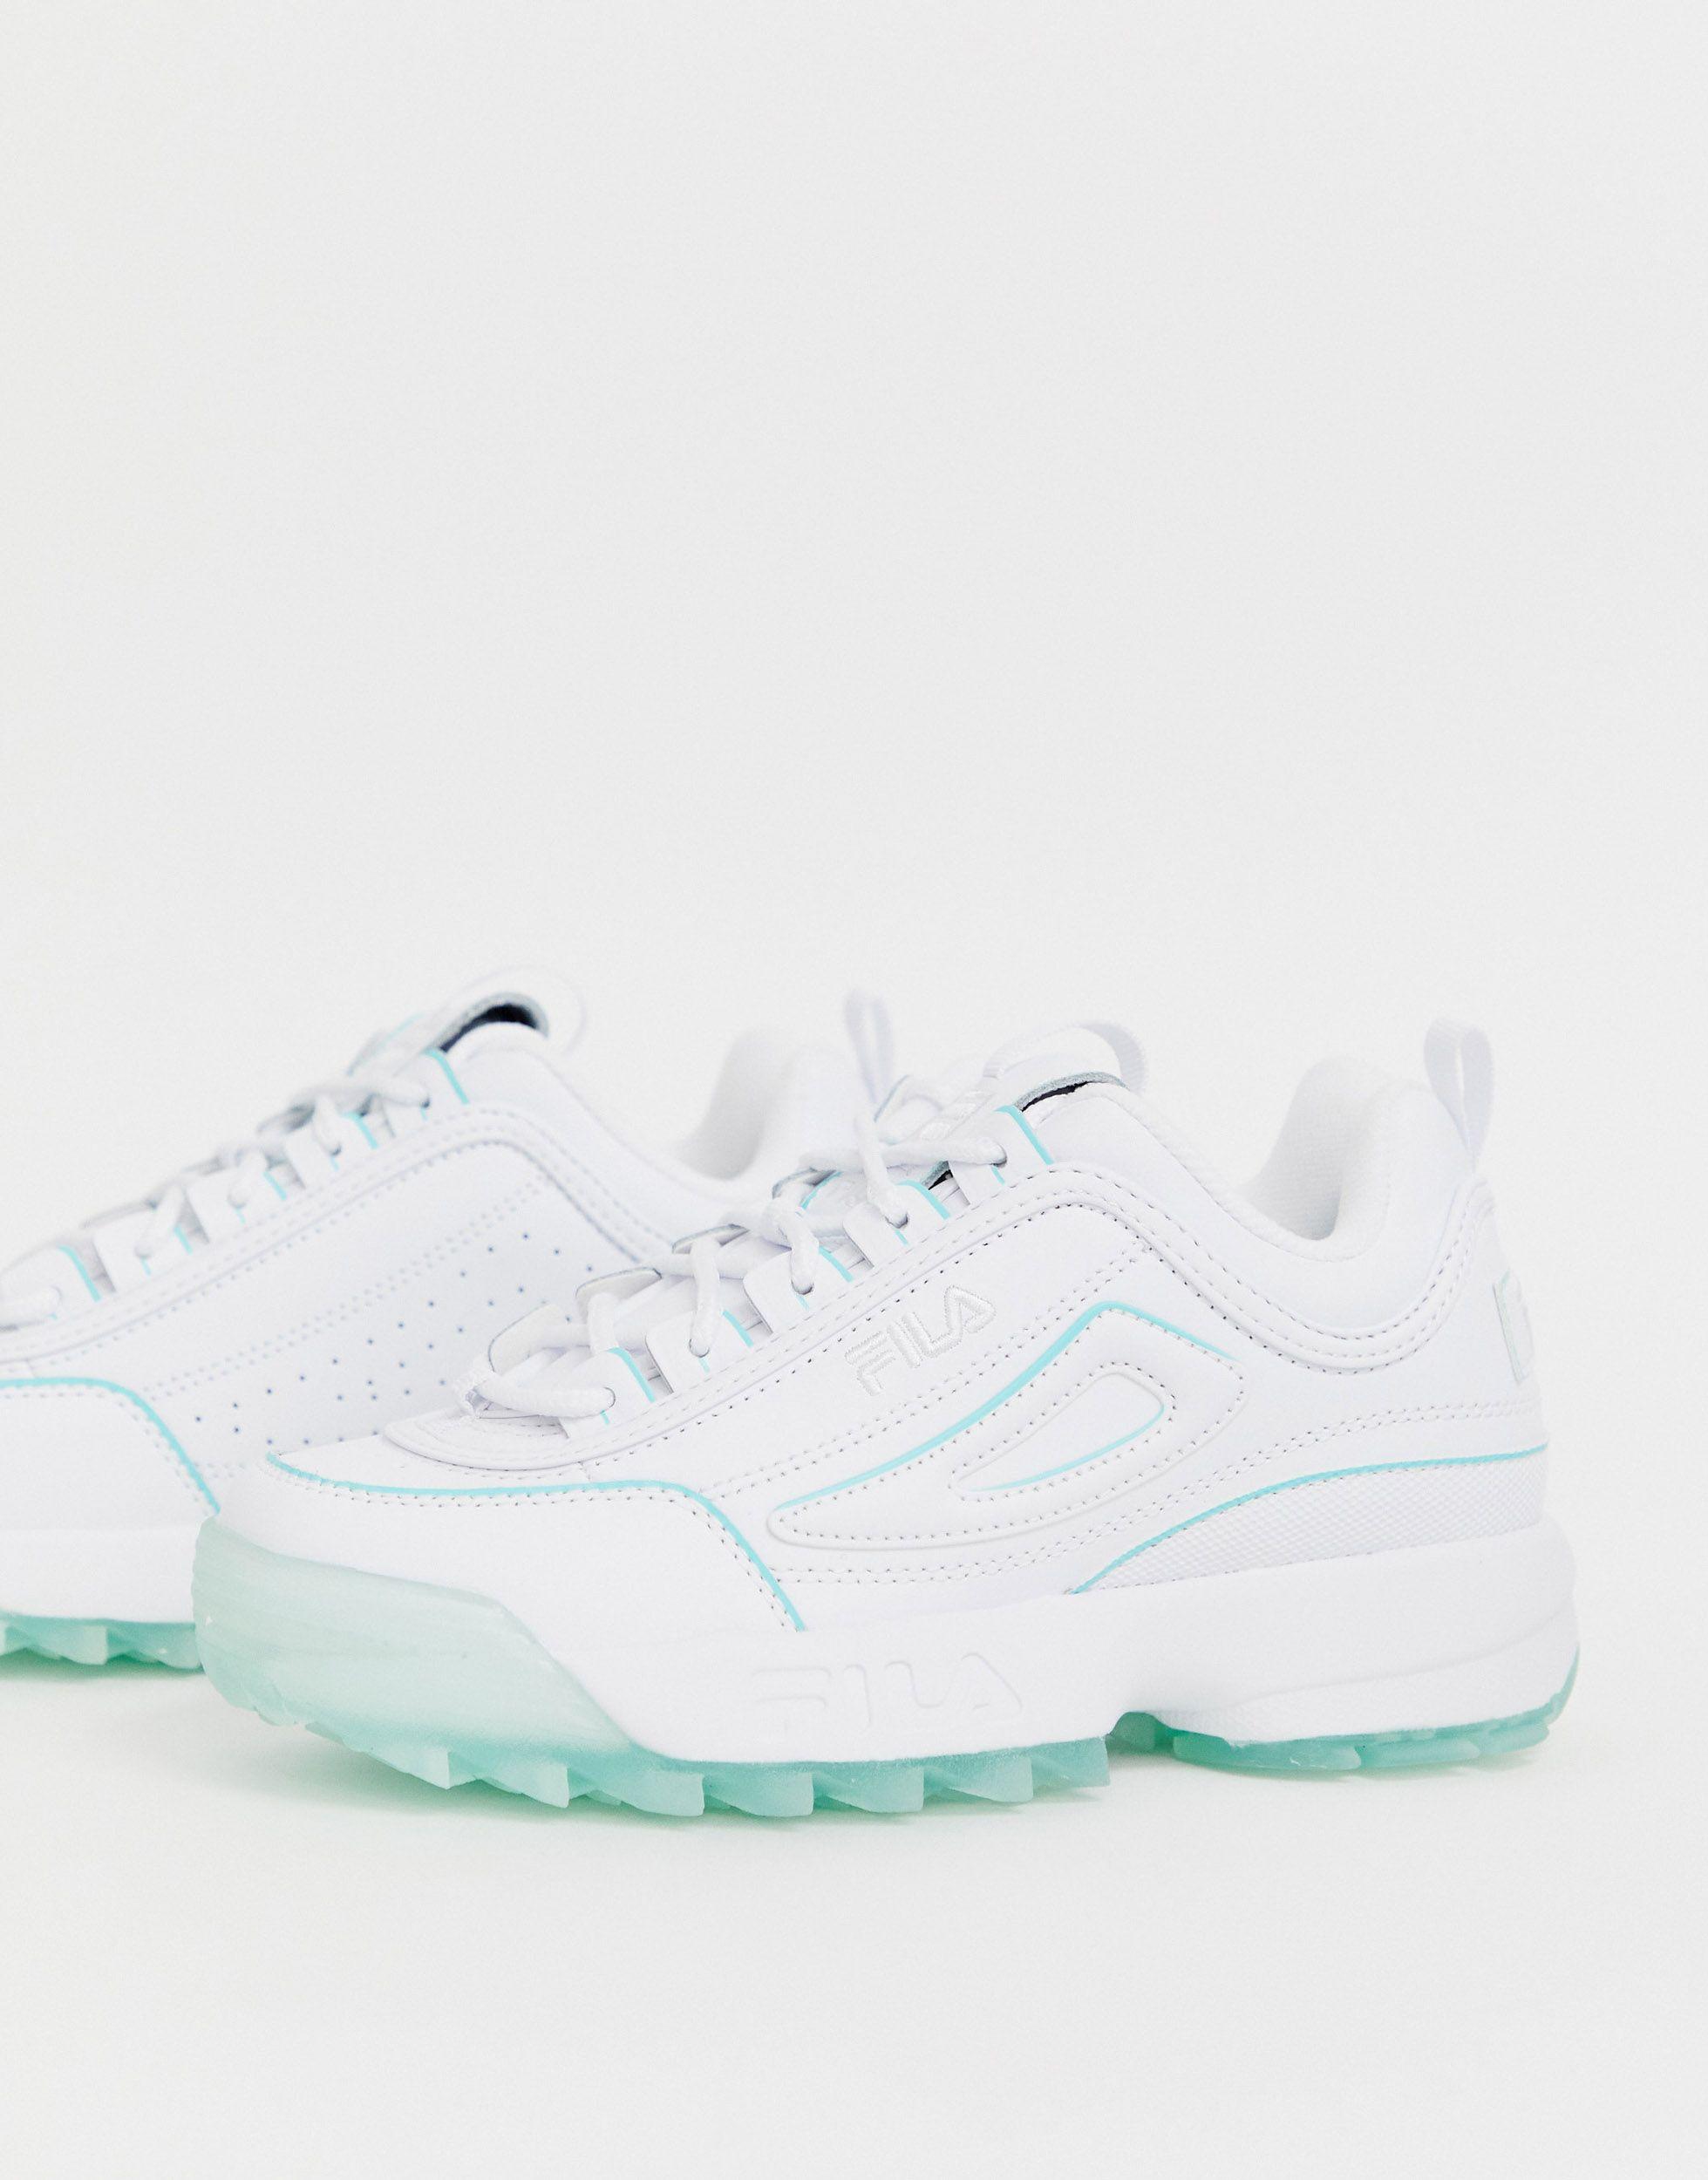 Fila Leather Disruptor Ii Trainers in White - Lyst